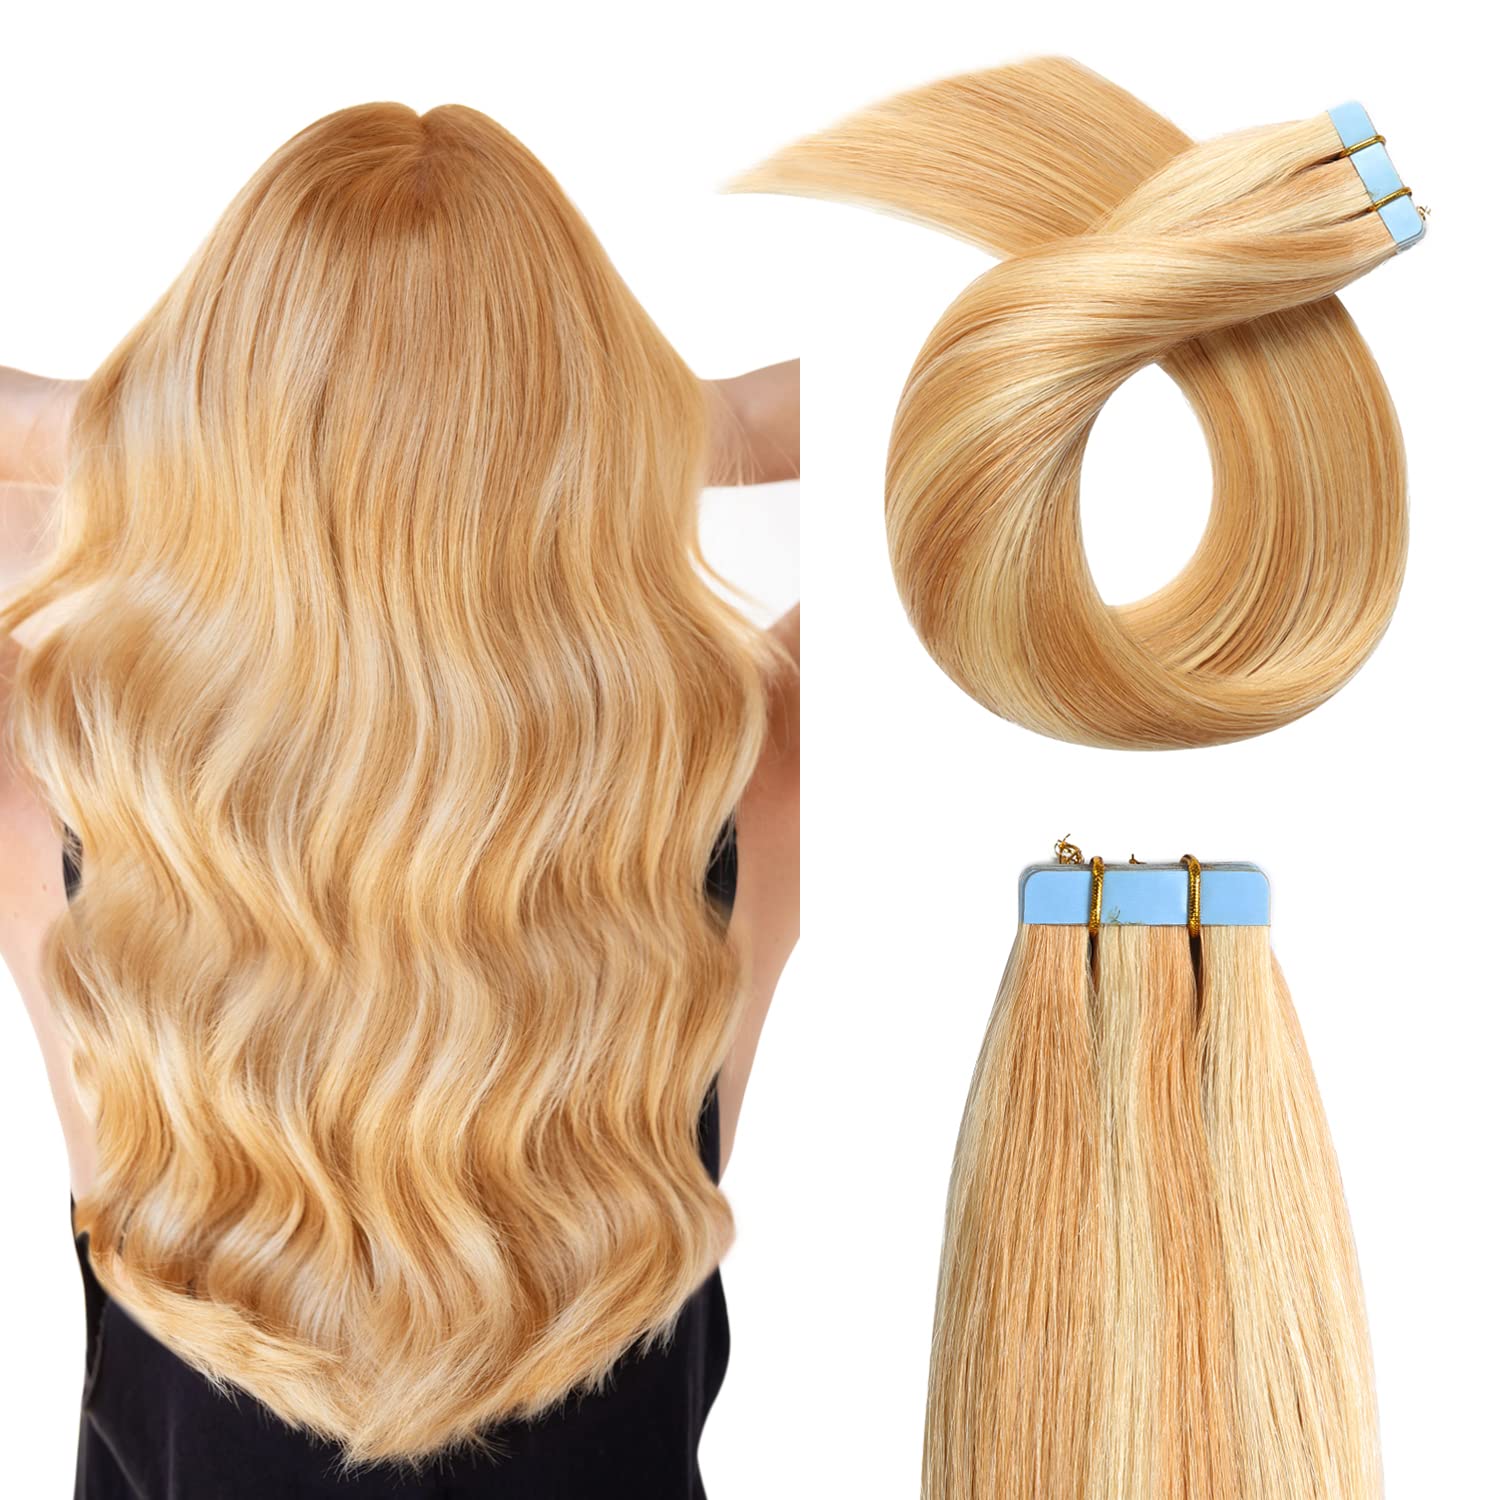 YILITE Tape in Human Hair Extensions Seamless Straight 12 inch - 20 inch 50g 20pcs Strawberry Blonde Highlighted Bleach Blonde Piano Color Tape in Hair Extensions